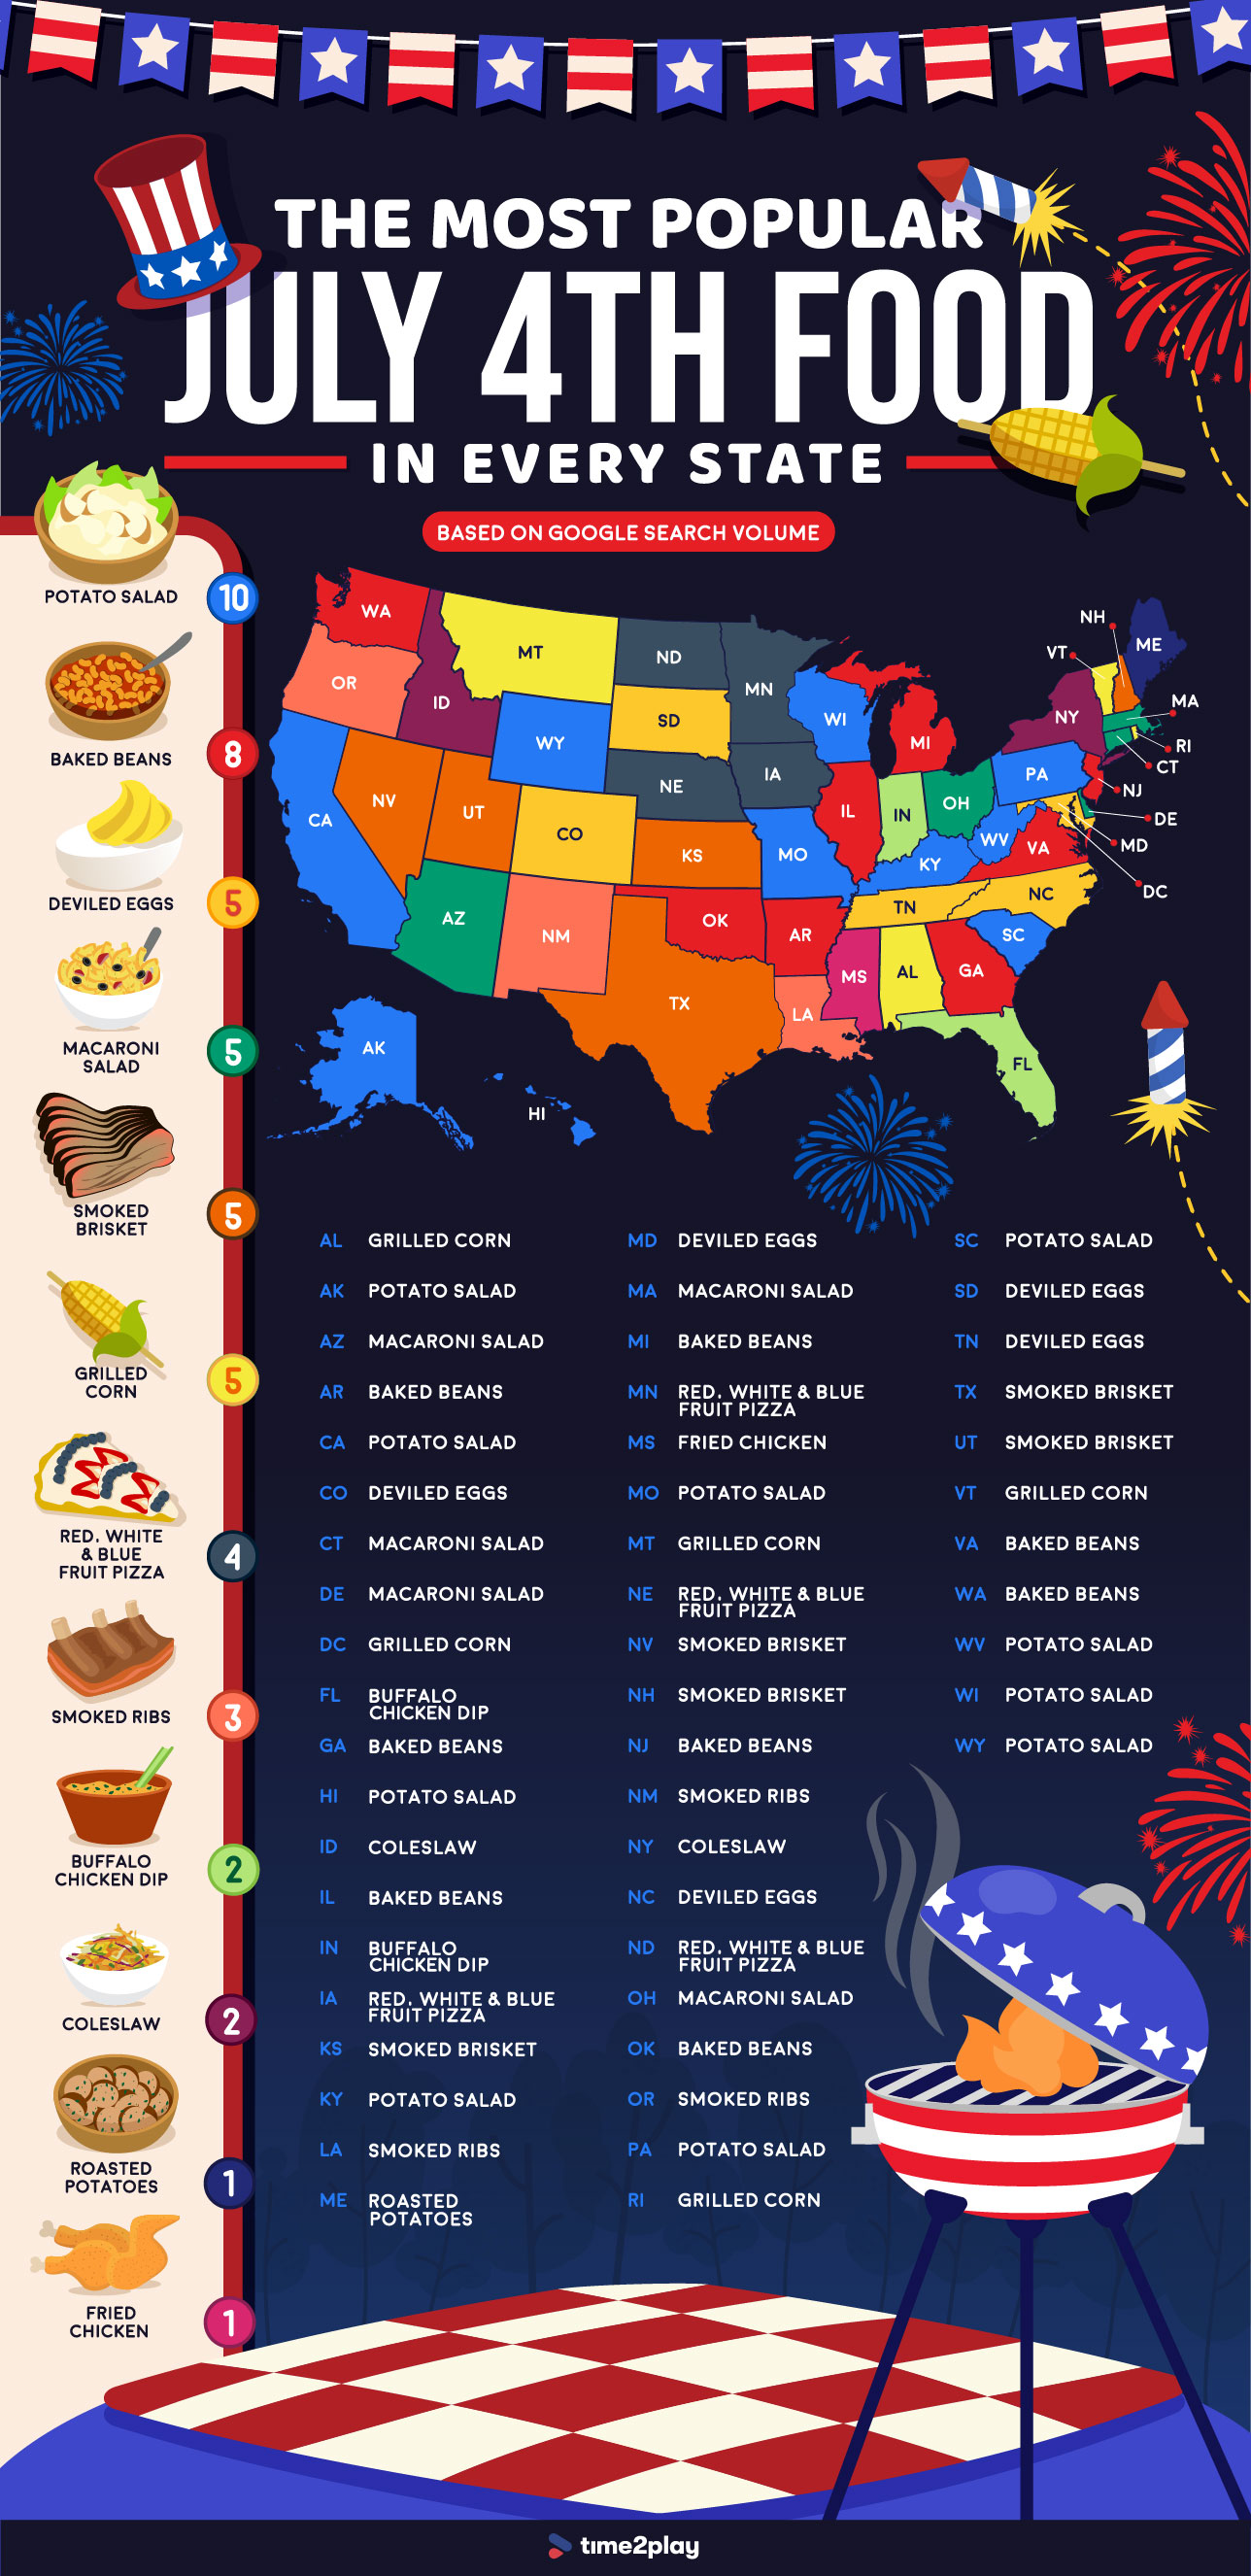 The Most Popular July 4th Food In Every State